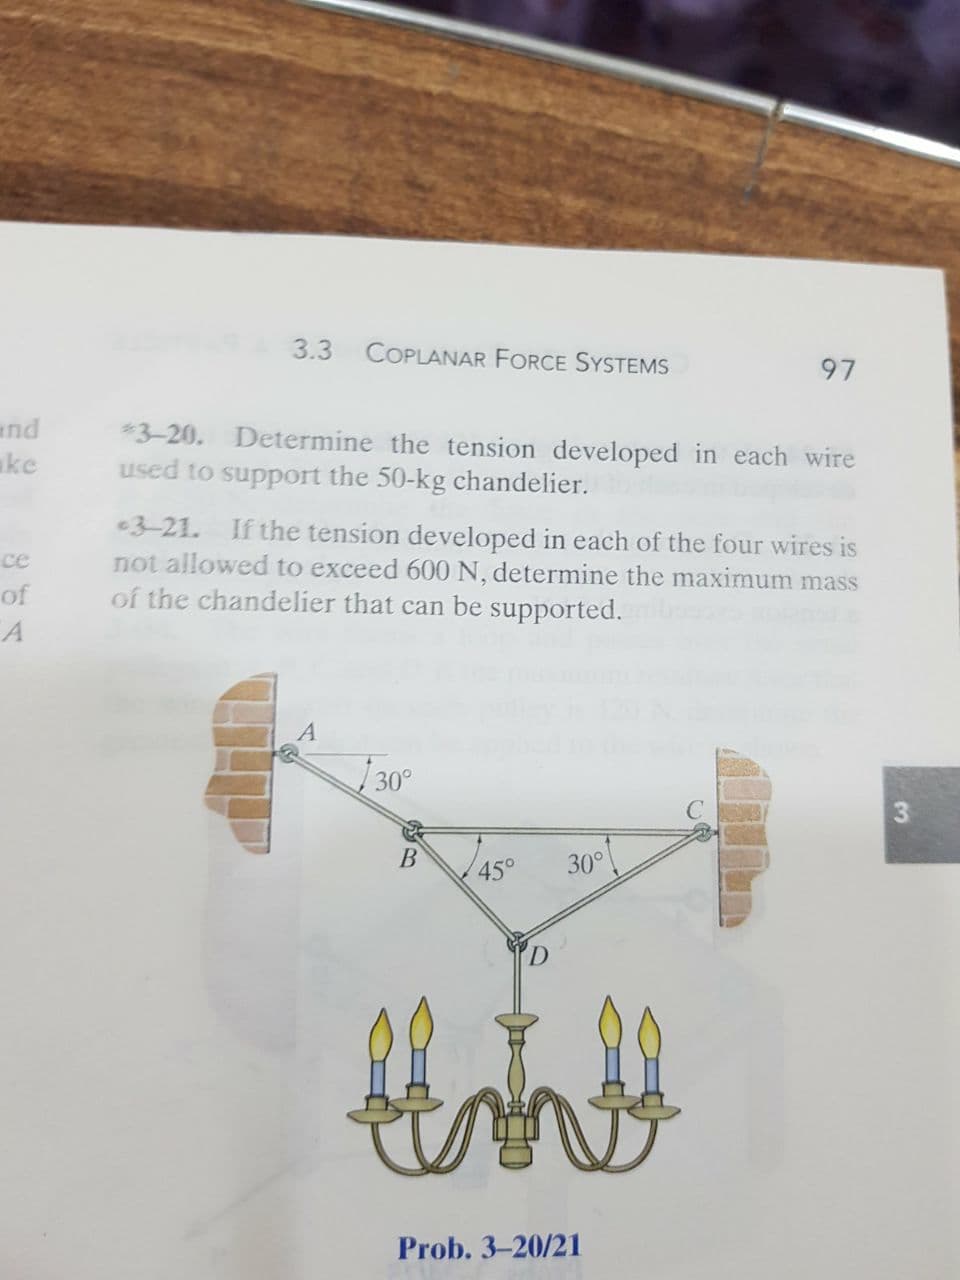 3.3 COPLANAR FORCE SYSTEMS
97
nd
*3-20. Determine the tension developed in each wire
used to support the 50-kg chandelier.
ke
3-21. If the tension developed in each of the four wires is
not allowed to exceed 600 N, determine the maximum mass
of the chandelier that can be supported.
ce
of
30°
В
30°
45°
Prob. 3-20/21
